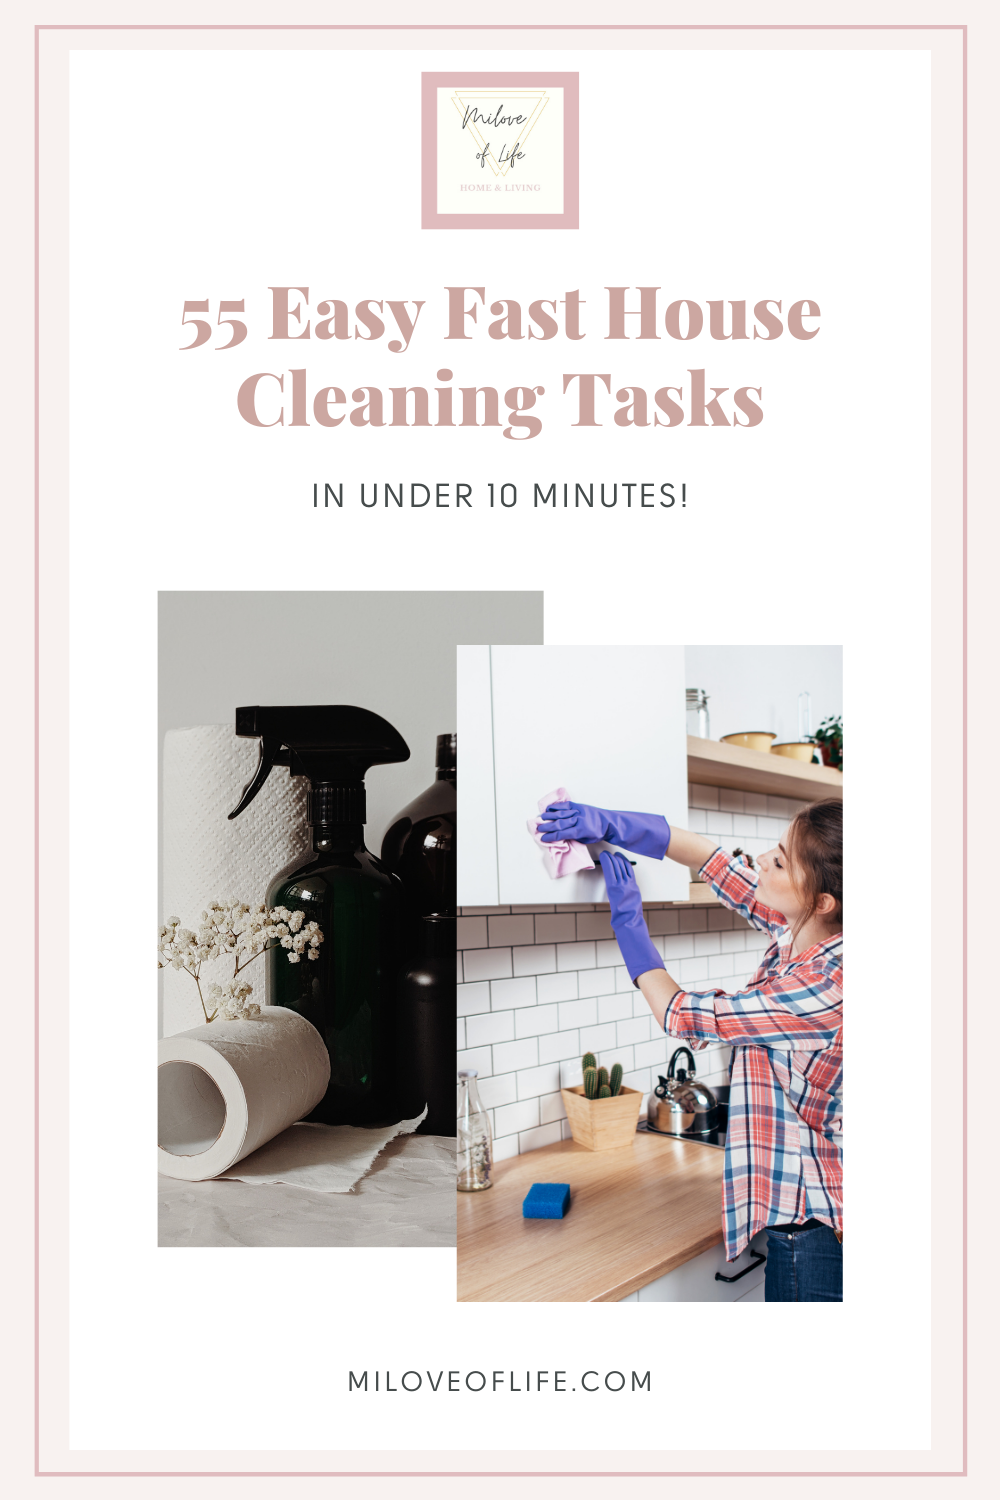 55 Easy Fast House Cleaning Tasks| 10 Minute Chores